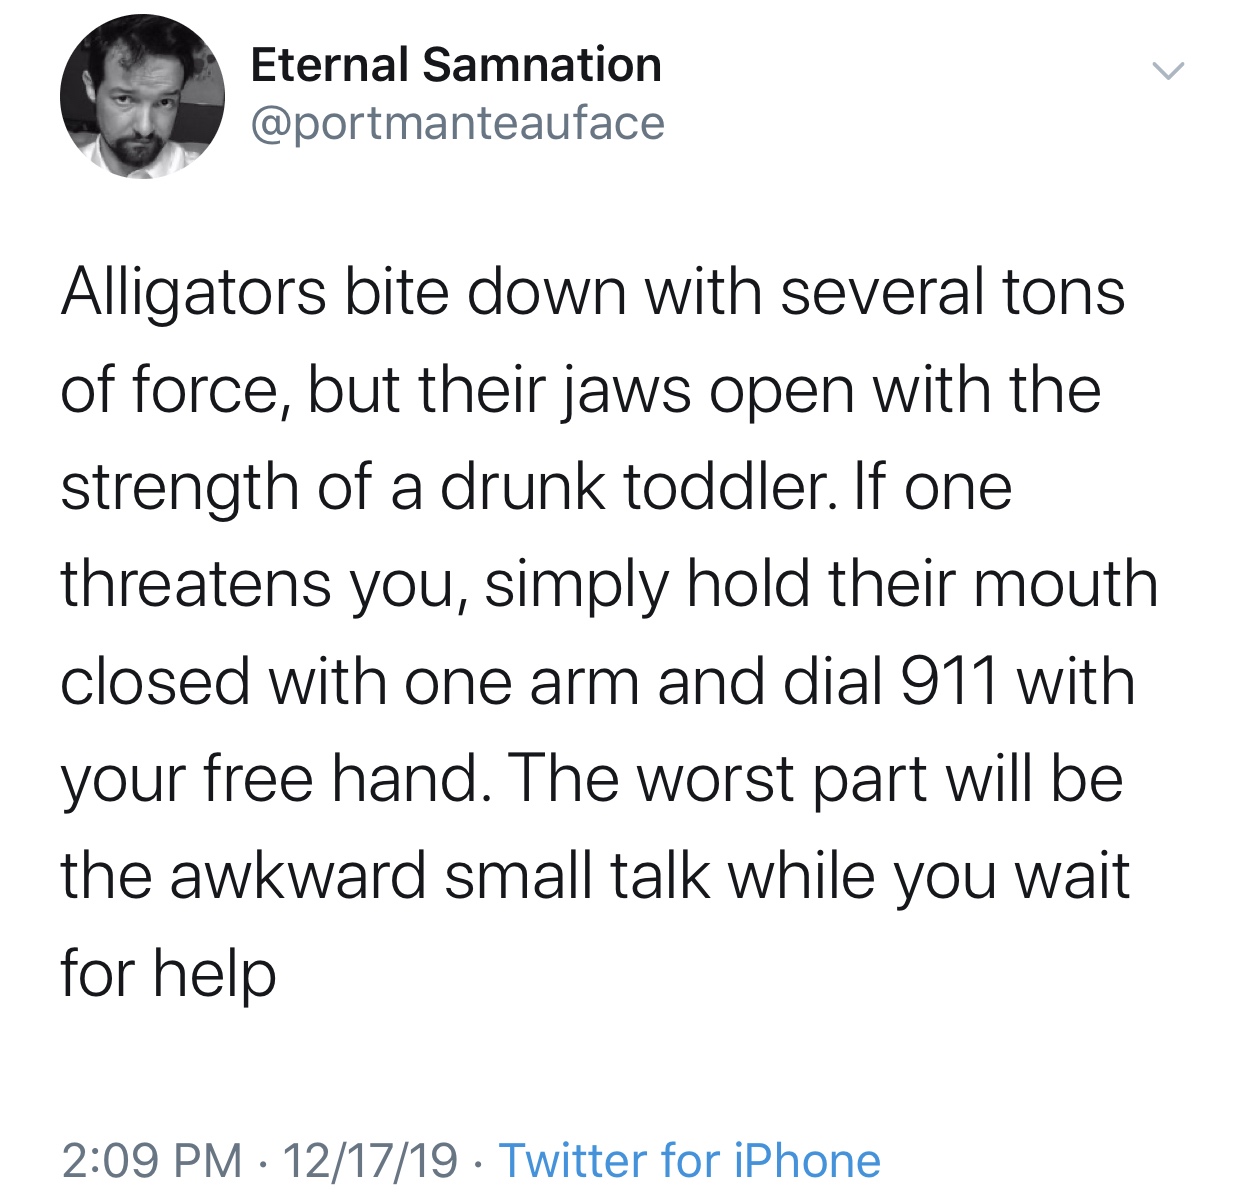 yosemite travis scott memes - Eternal Samnation Alligators bite down with several tons of force, but their jaws open with the strength of a drunk toddler. If one threatens you, simply hold their mouth closed with one arm and dial 911 with your free hand. 